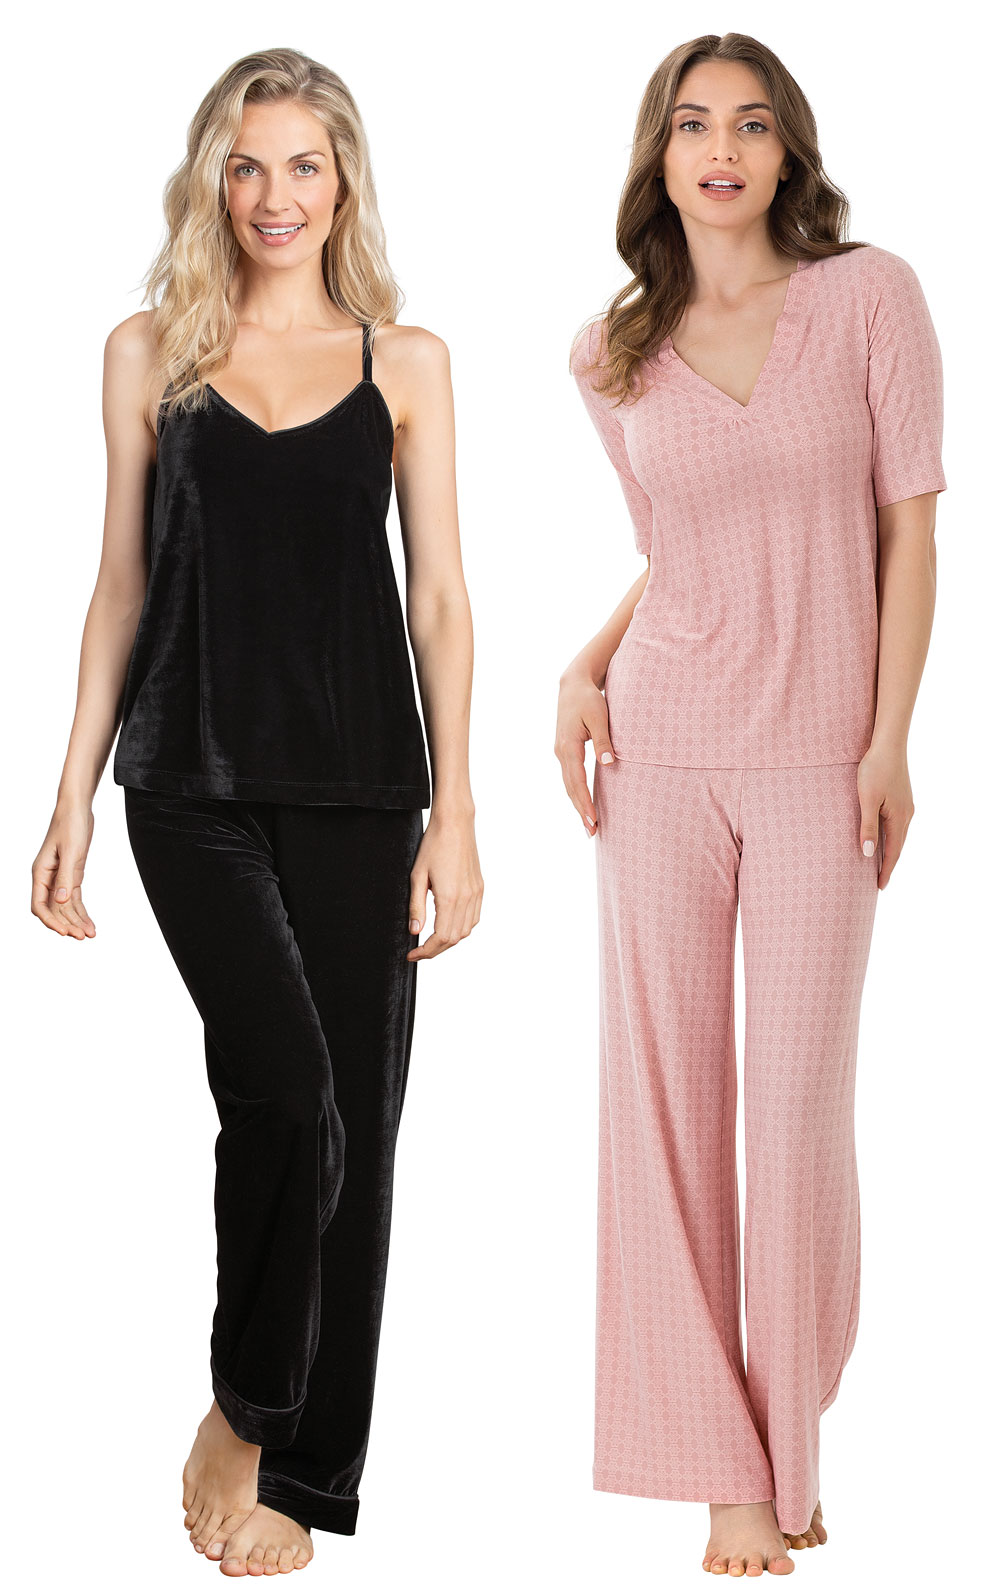 Black Velour Cami PJs & Pink Naturally Nude PJs in Womens 